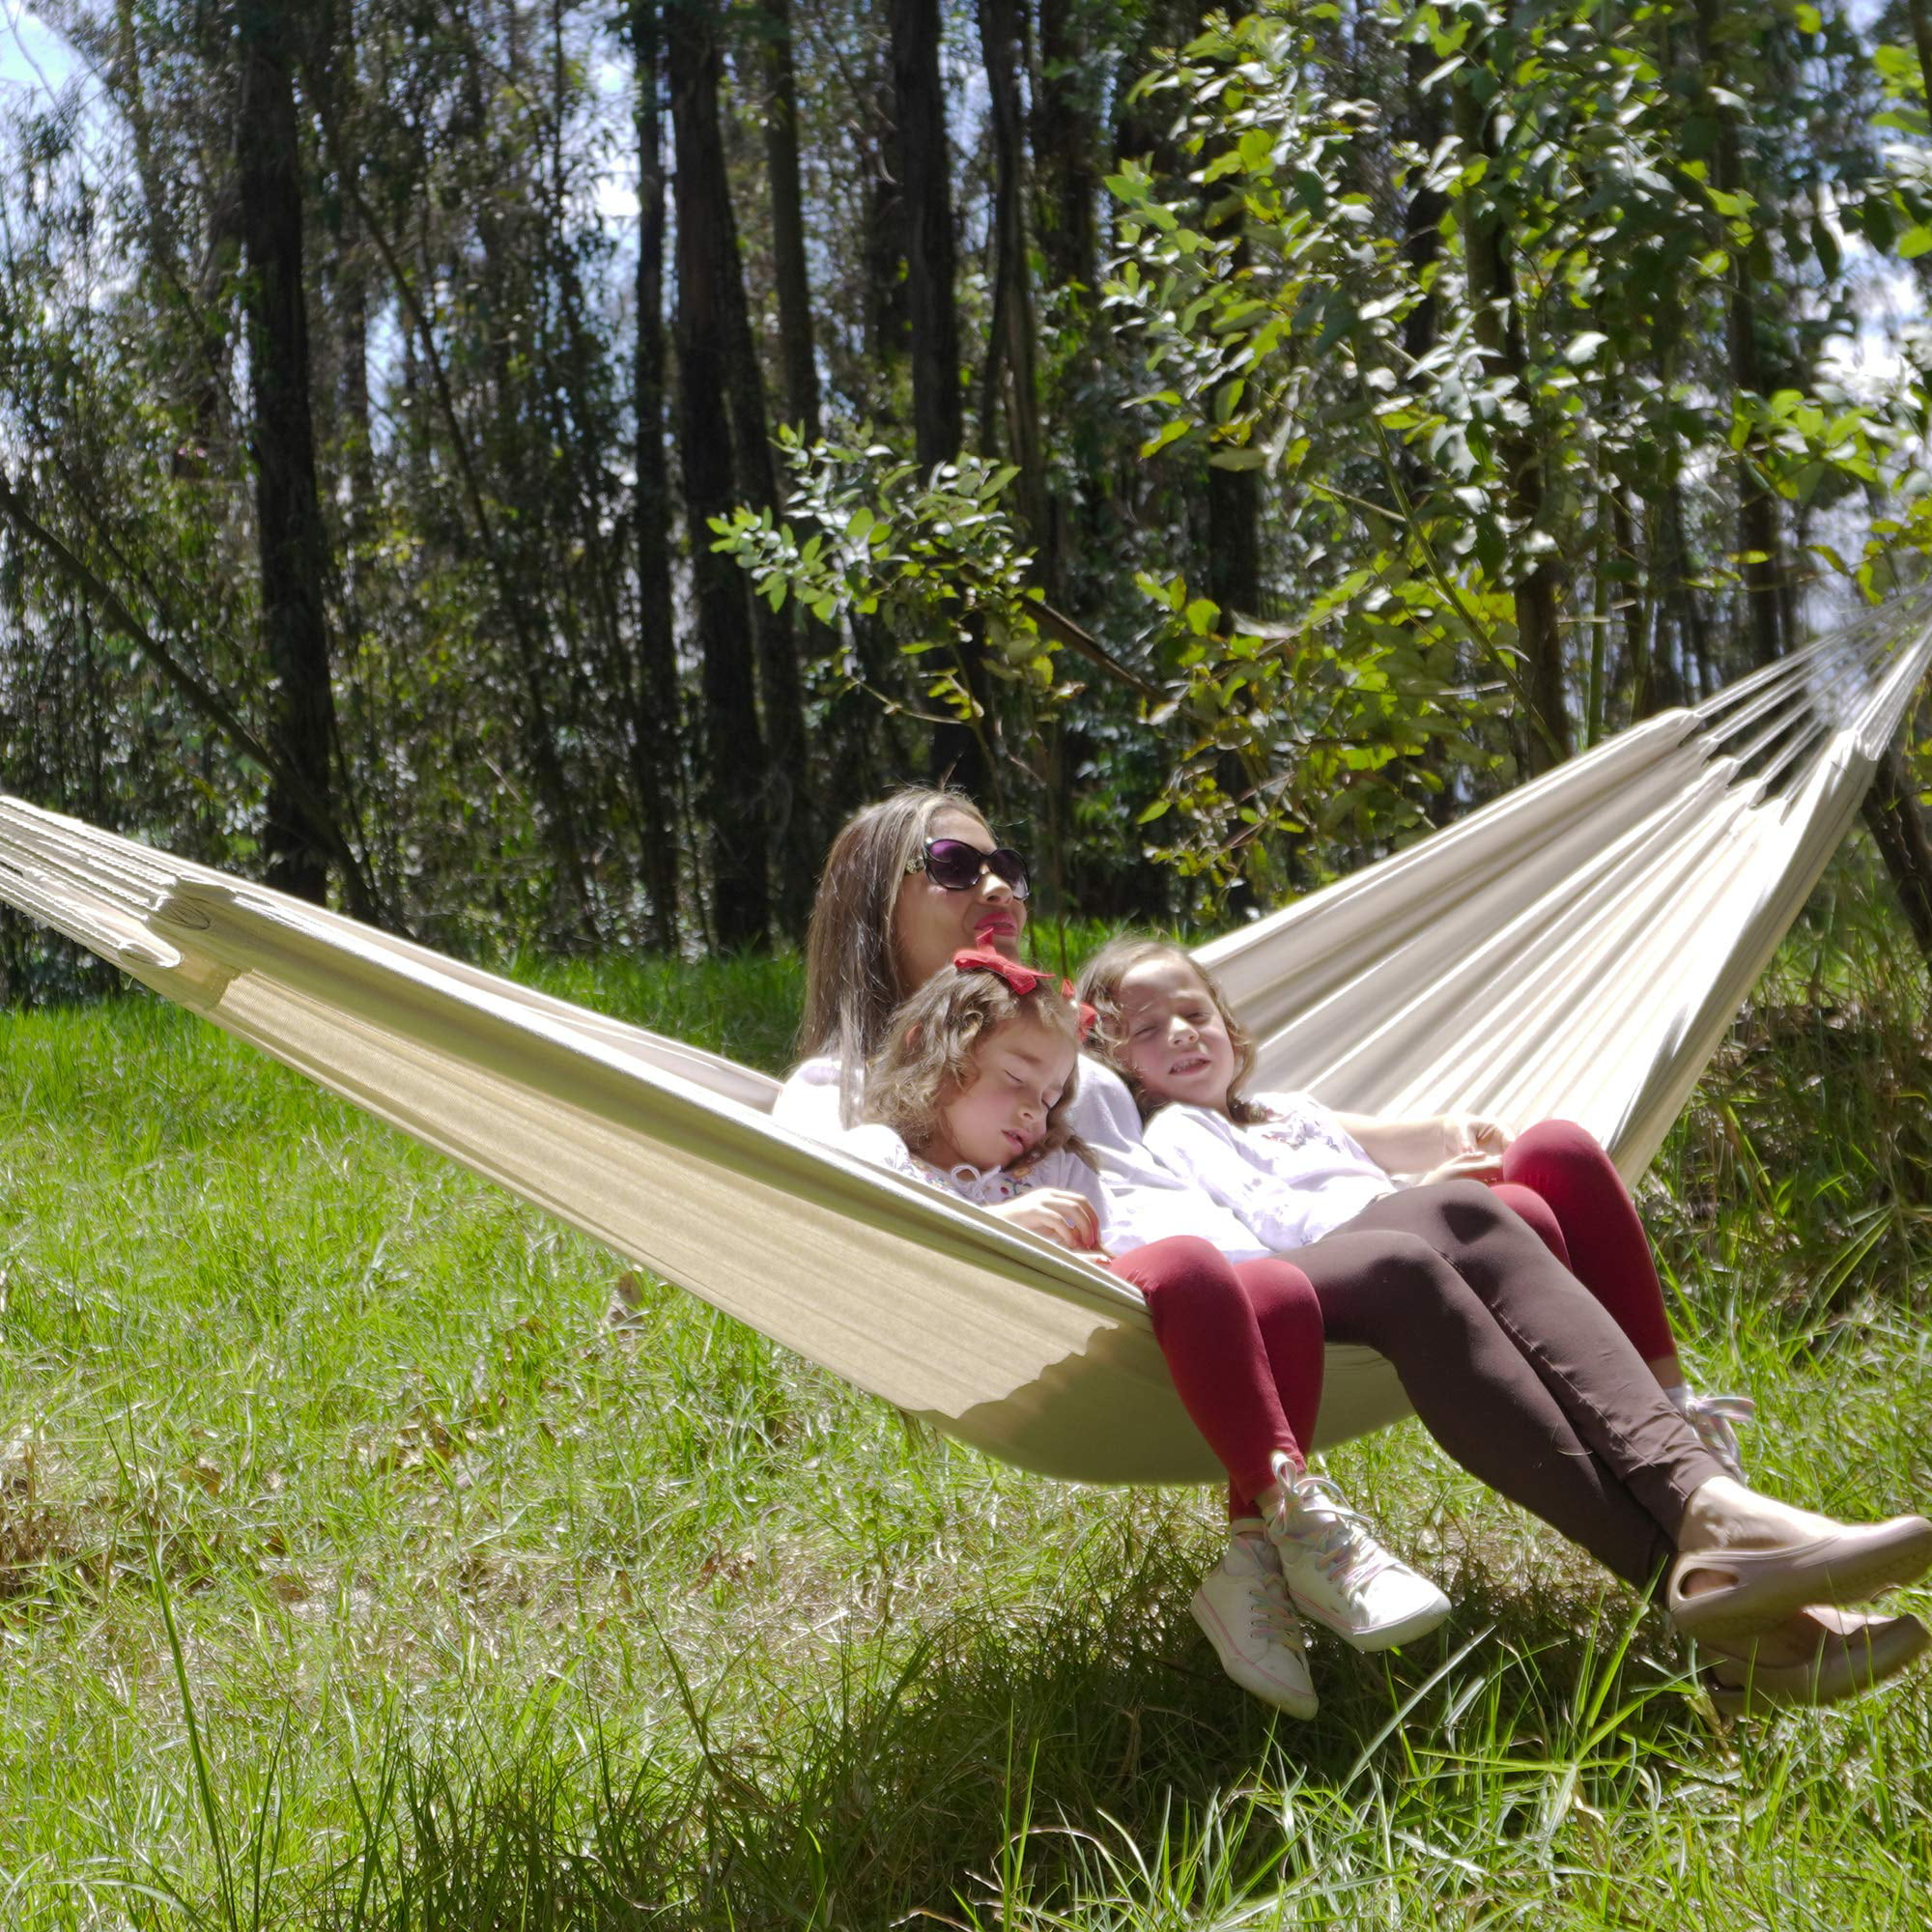 SUNCREAT 12ft Double Brazilian Wide Hammock Cotton Fabric Travel Camping Hammock with 2 Person for Indoor or Outdoor-Natural